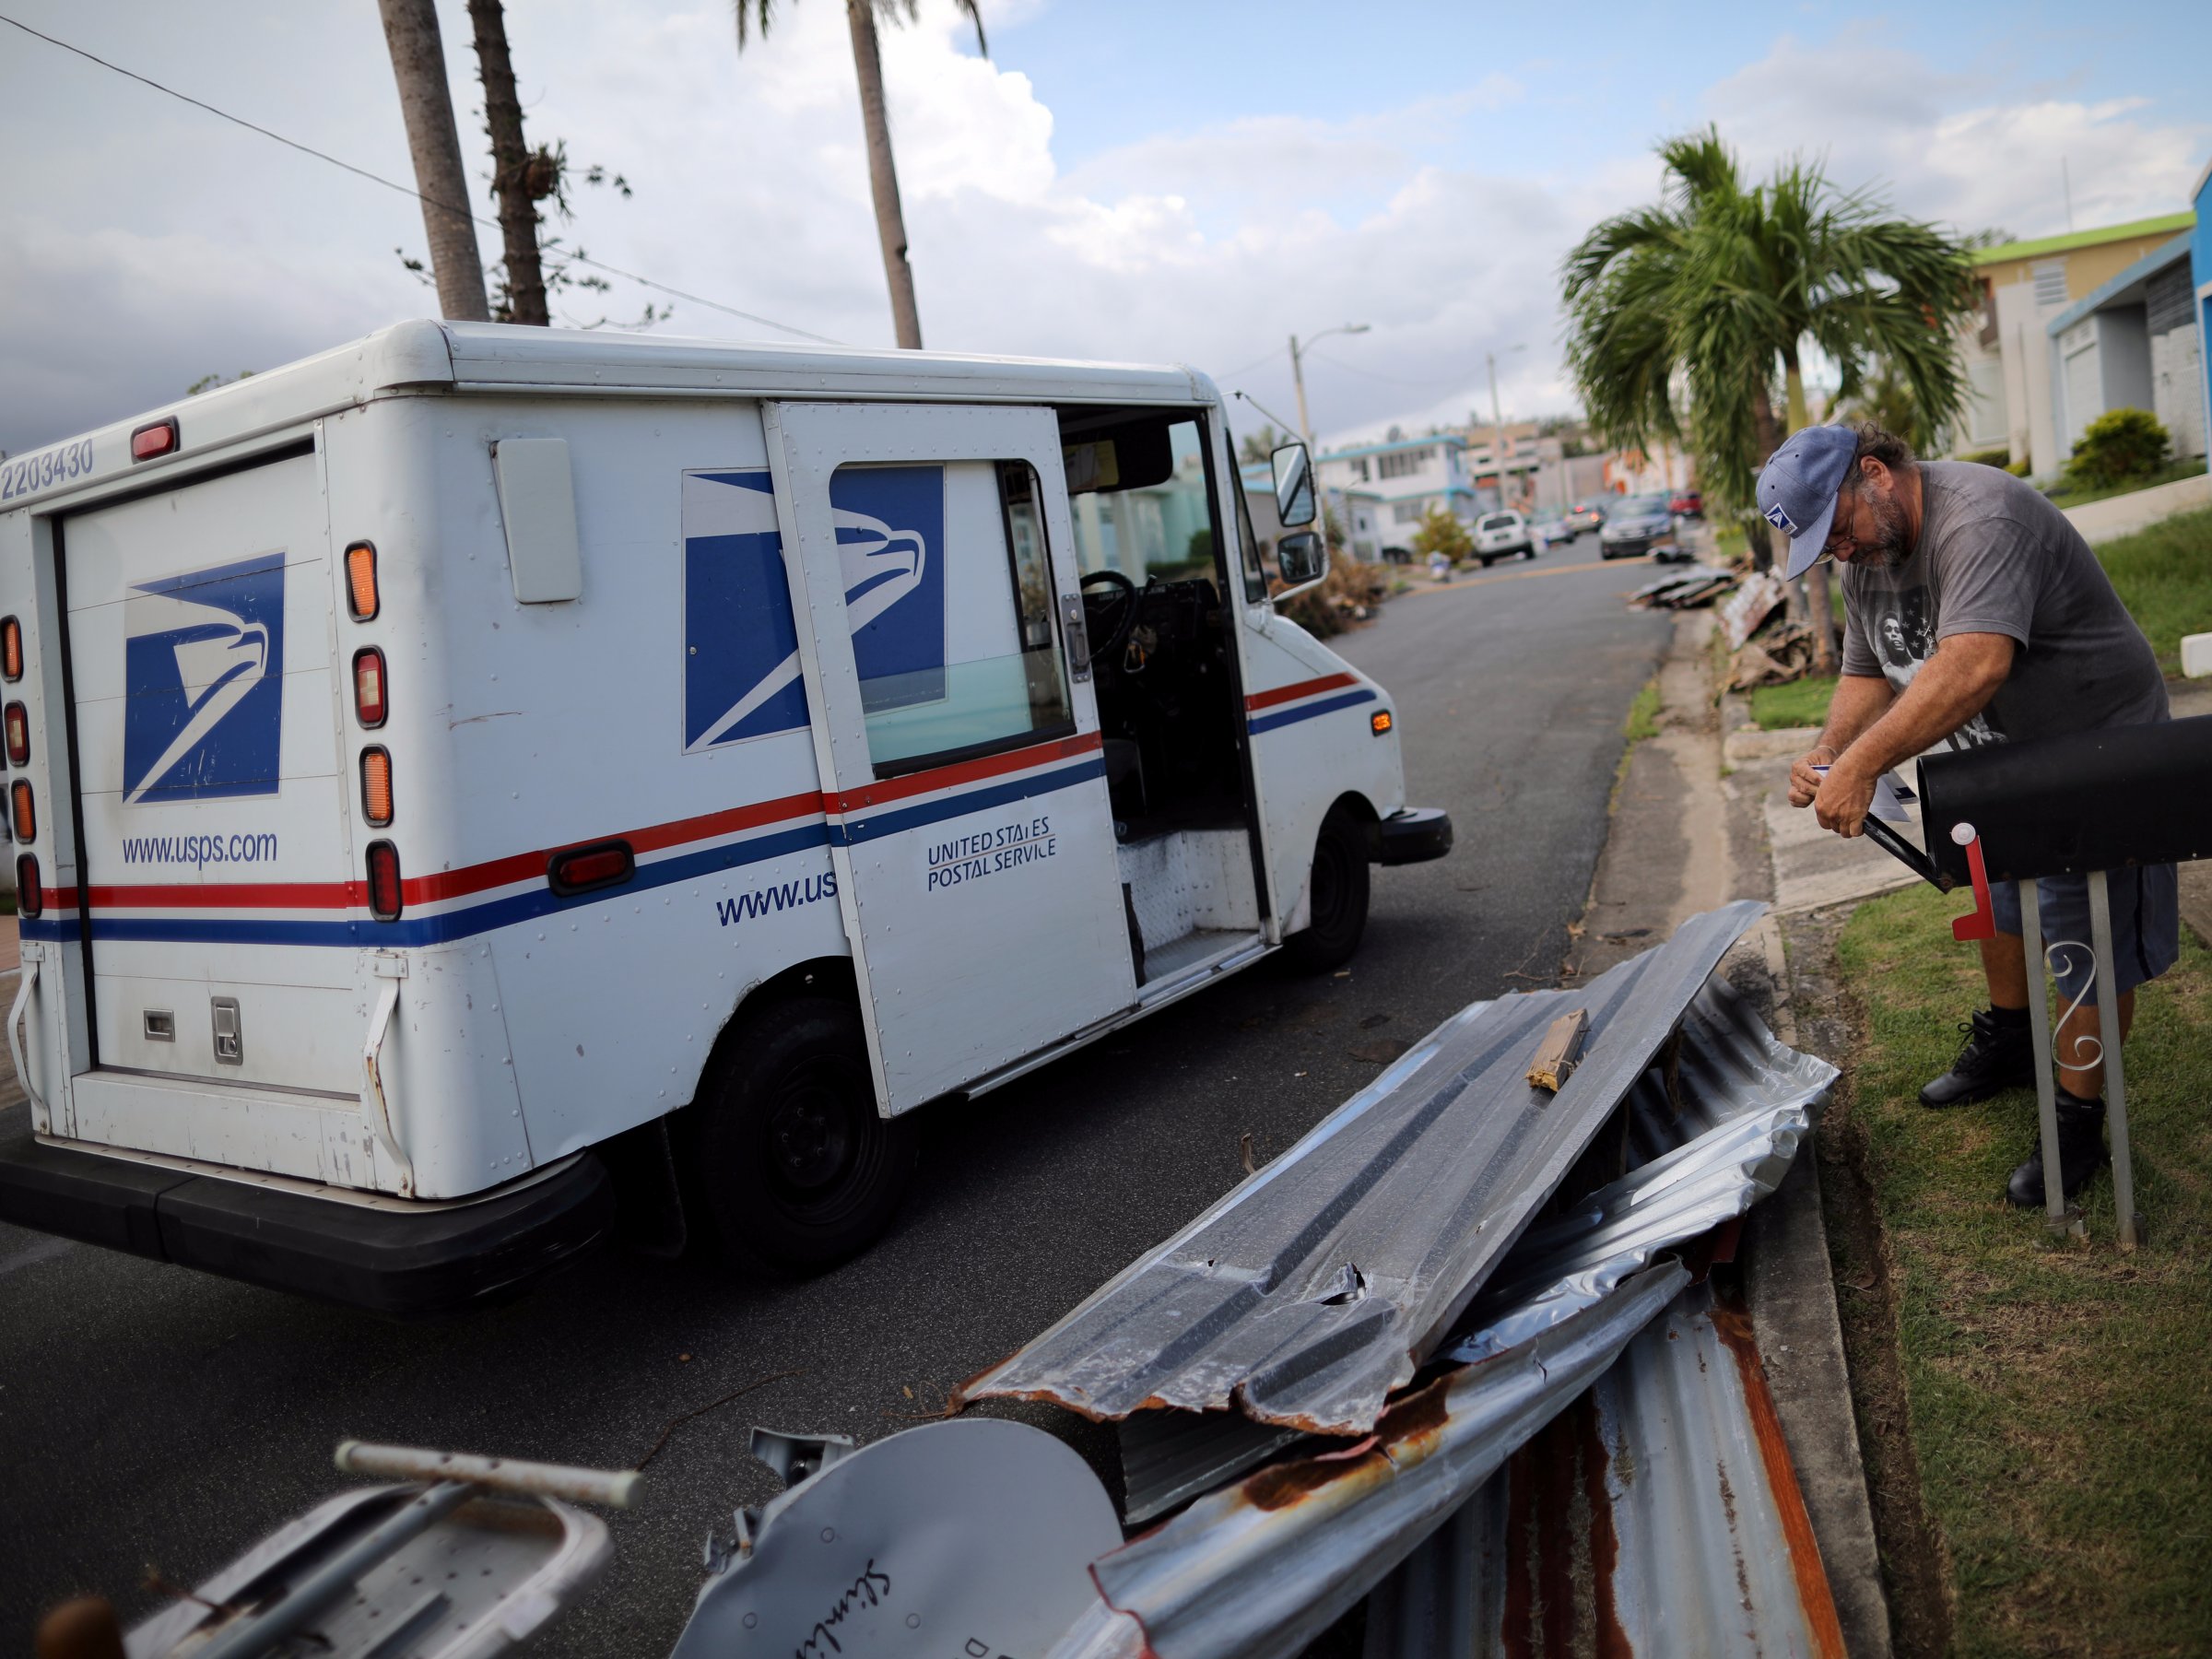 U.S. Mail Will Be Re-Routed Through Miami So Desperate Puerto Ricans Cannot Steal Mail Intended For Virgin Islanders